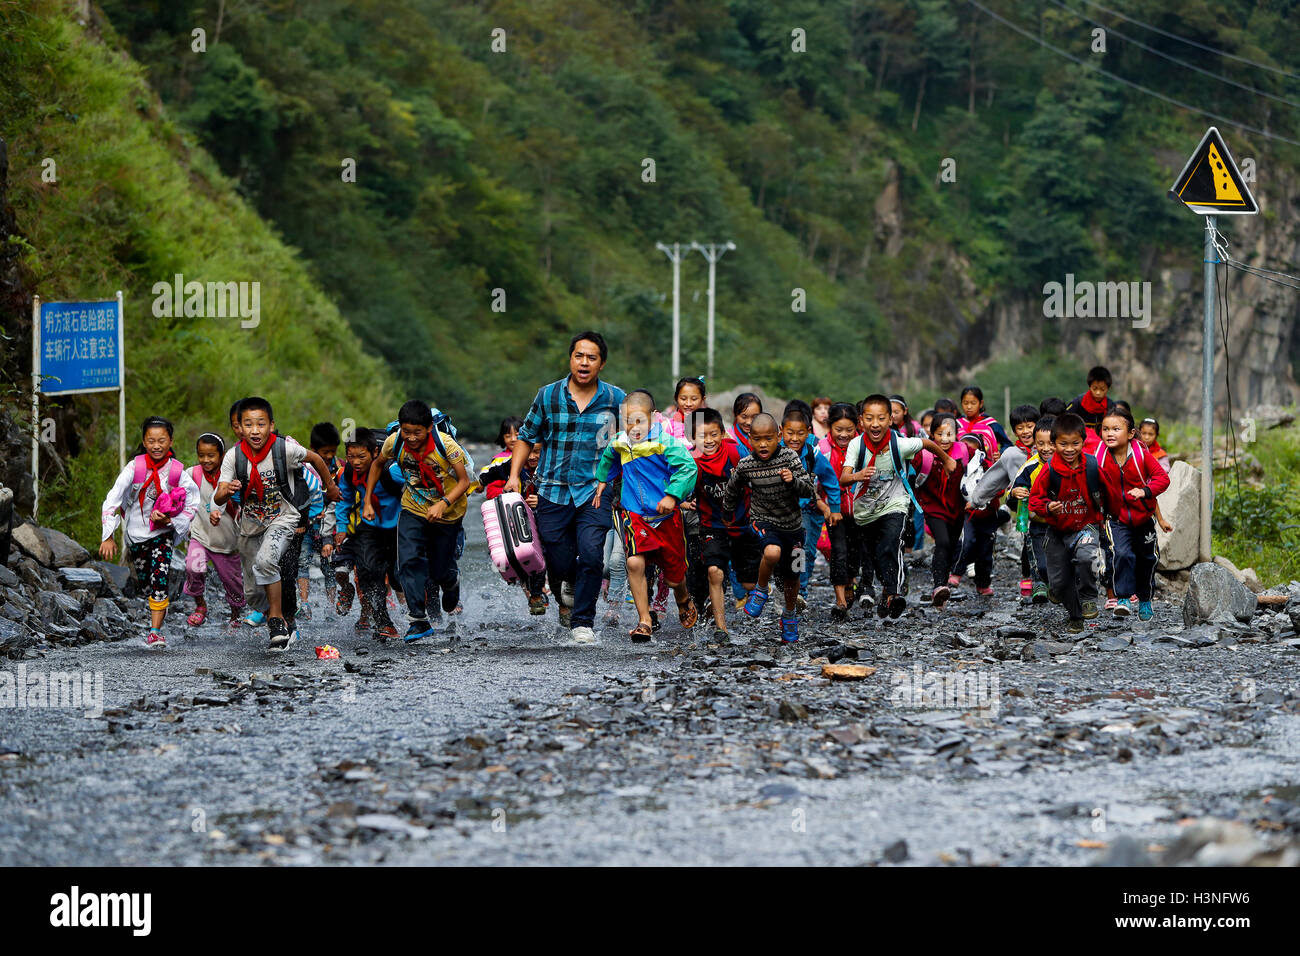 (161011) -- BEIJING, Oct. 11, 2016 (Xinhua) -- Photo taken on Sept. 28, 2016 shows Sang Lei and students running on a flooded road to Dimaluo Village, a remote village in Nujiang Lisu Autonomous Prefecture of southwest China's Yunnan Province. Sang Lei, a college graduate majored in computer education, has been as a voluntary teacher of Pengdang Primary School since 2007. In nearly ten years of teaching, he tried his best to provide better learning environment for his pupils. Since 2006, more than 500,000 young people in China like Sang Lei have gone to central and western China to offer educ Stock Photo